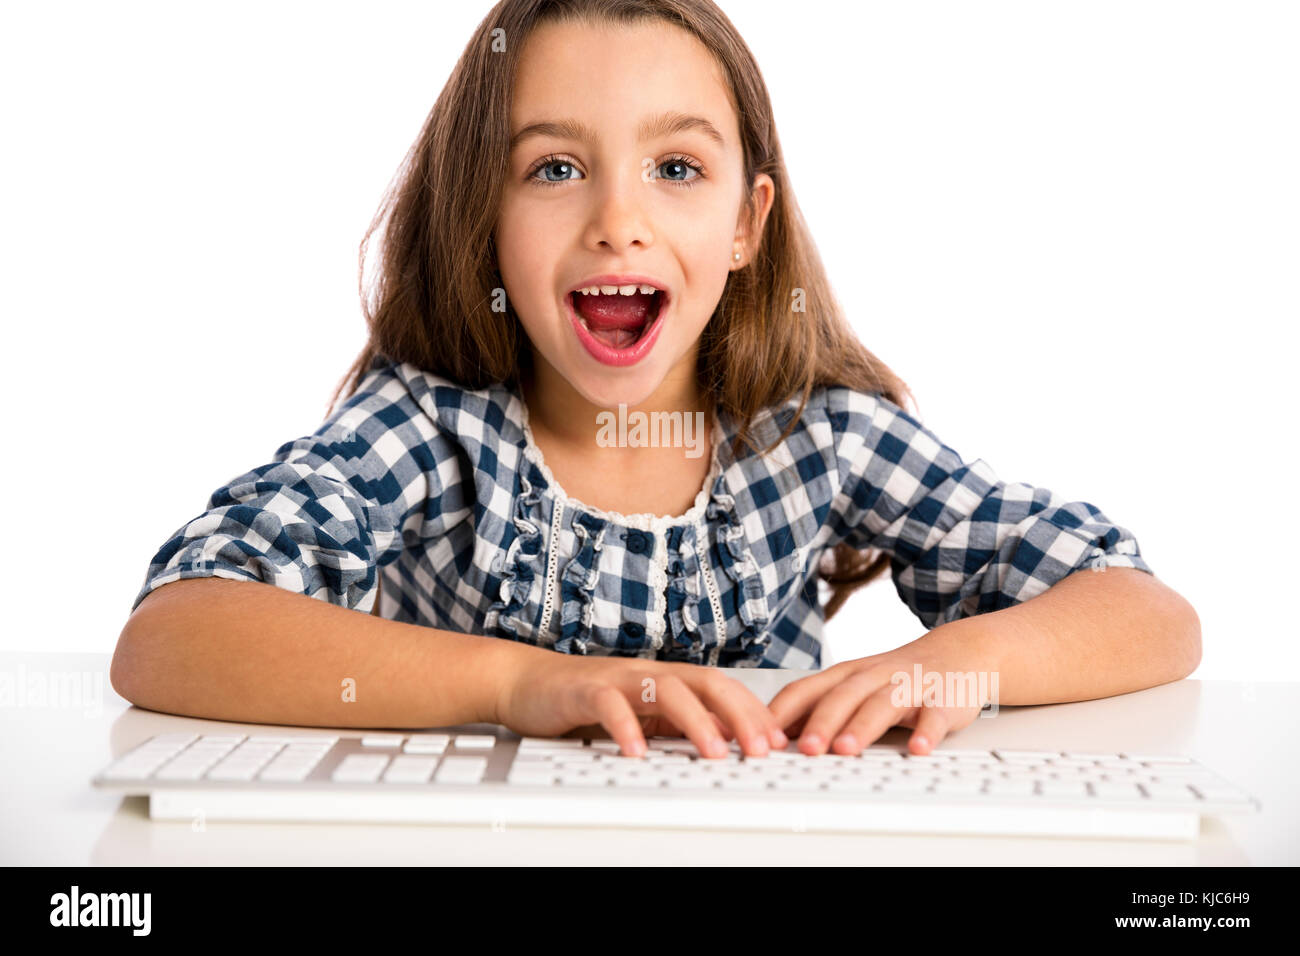 24,403 Cute Little Girl Computer Stock Photos - Free & Royalty-Free Stock  Photos from Dreamstime